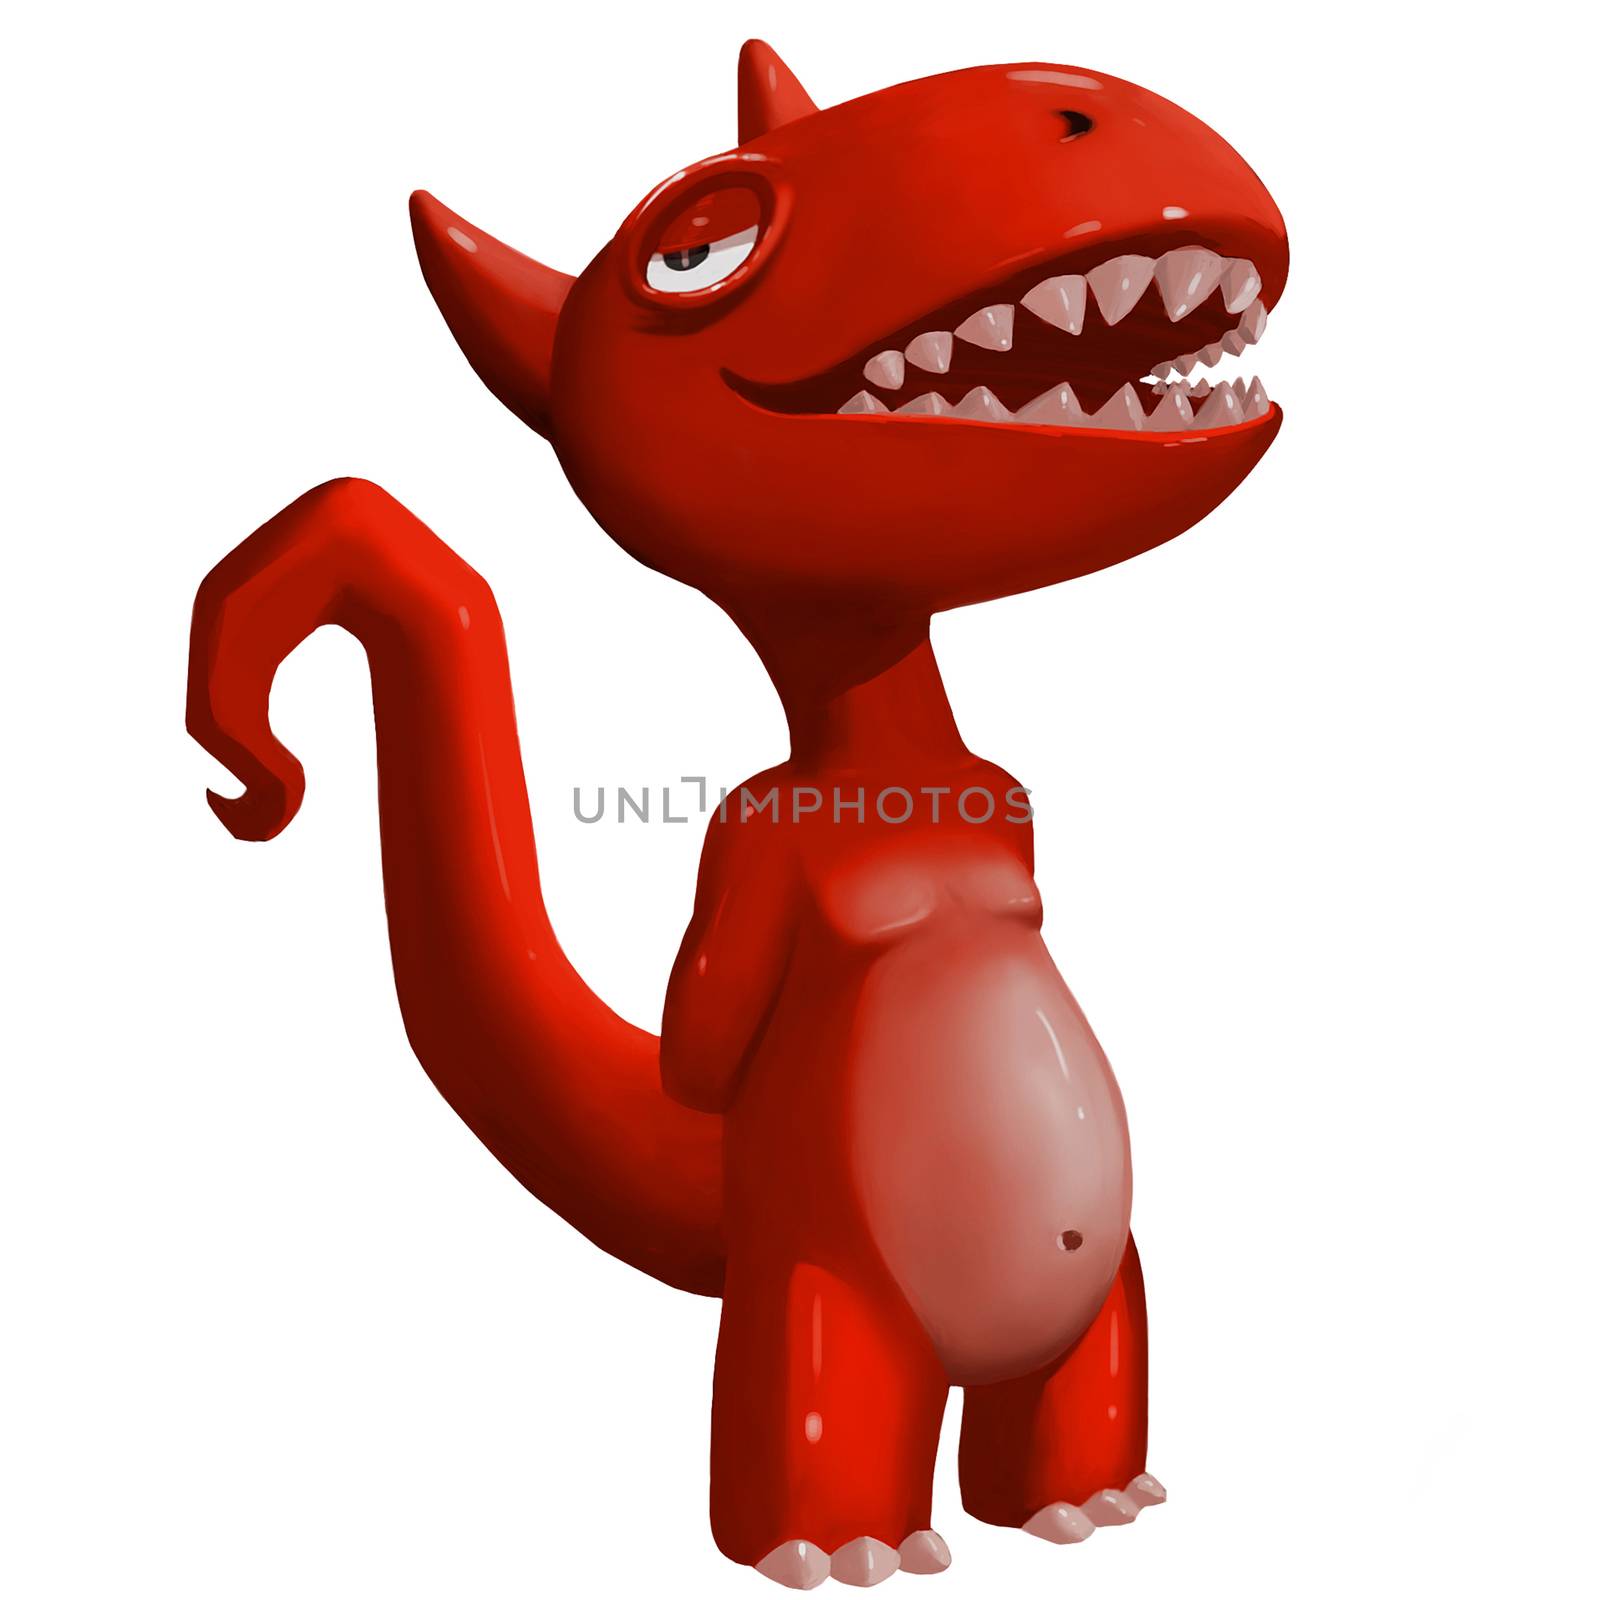 Illustration: Mr.N, The Red Dinosaur Man - Monster Camp Topic. Element / Character Design - Fantastic / Cartoon / Sci-Fi Style by NextMars